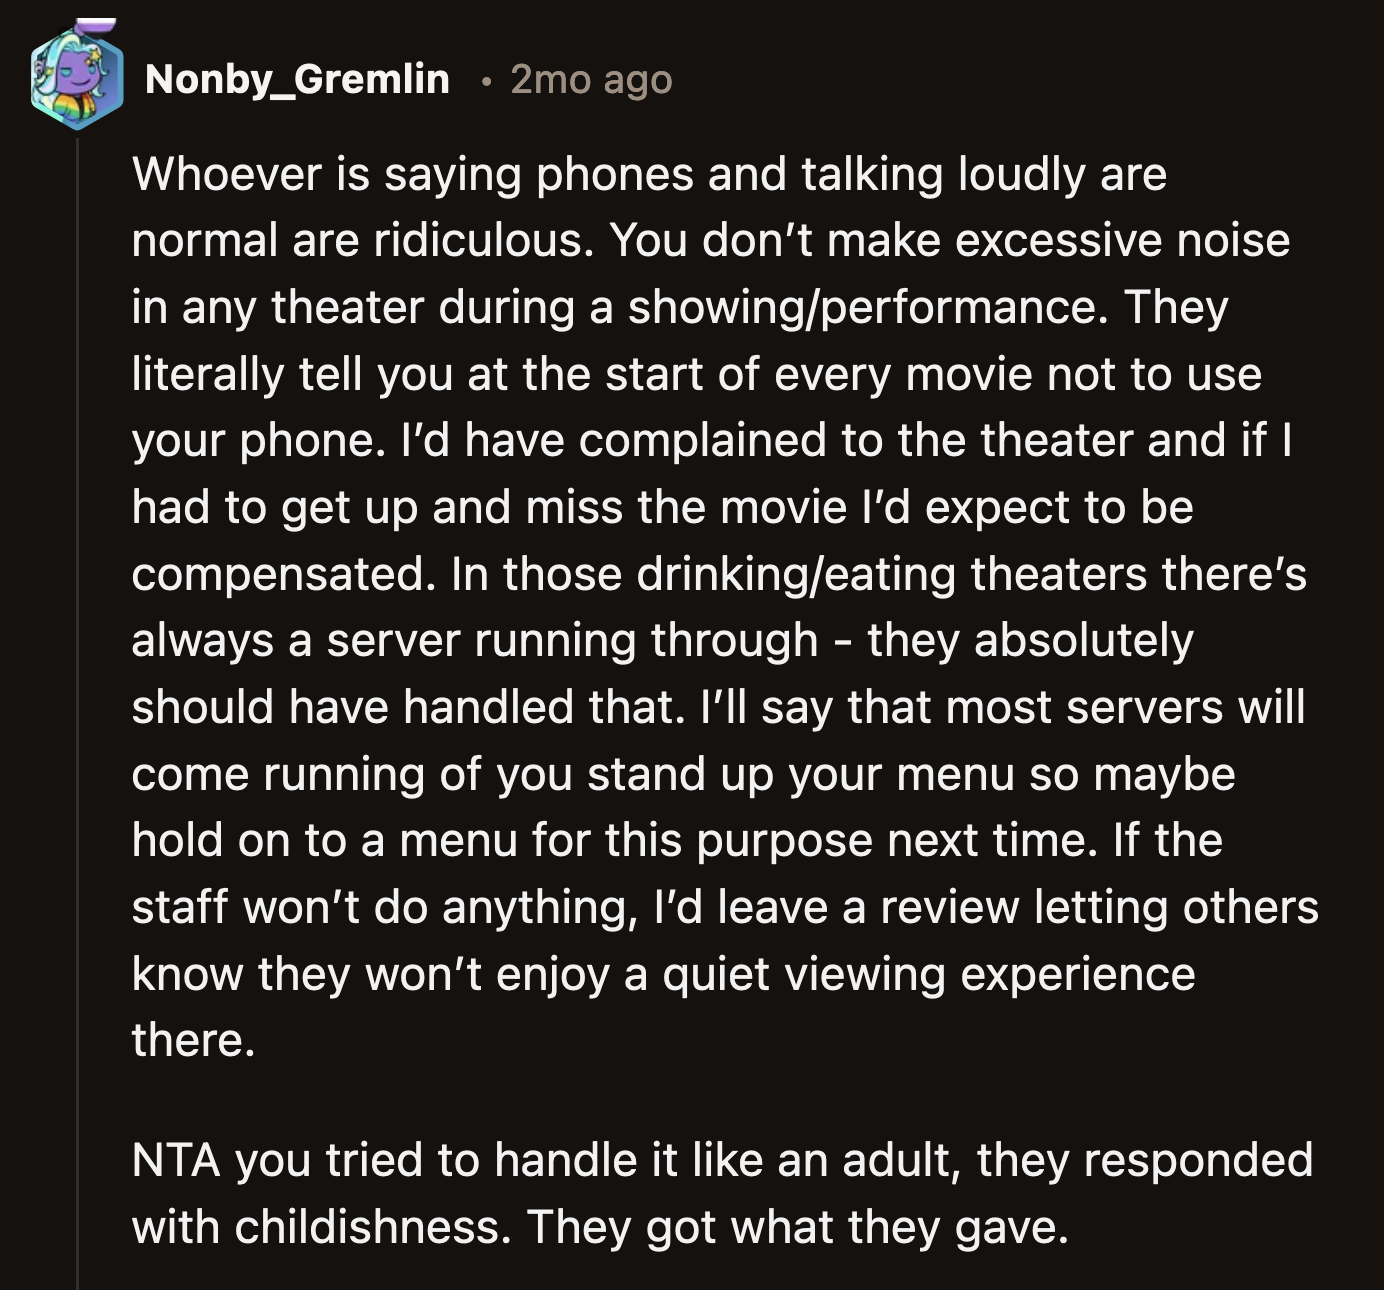 OP tried to talk to the woman reasonably at first. Sure, OP could have reported the issue to a theater staff, but the popcorn was just as effective.